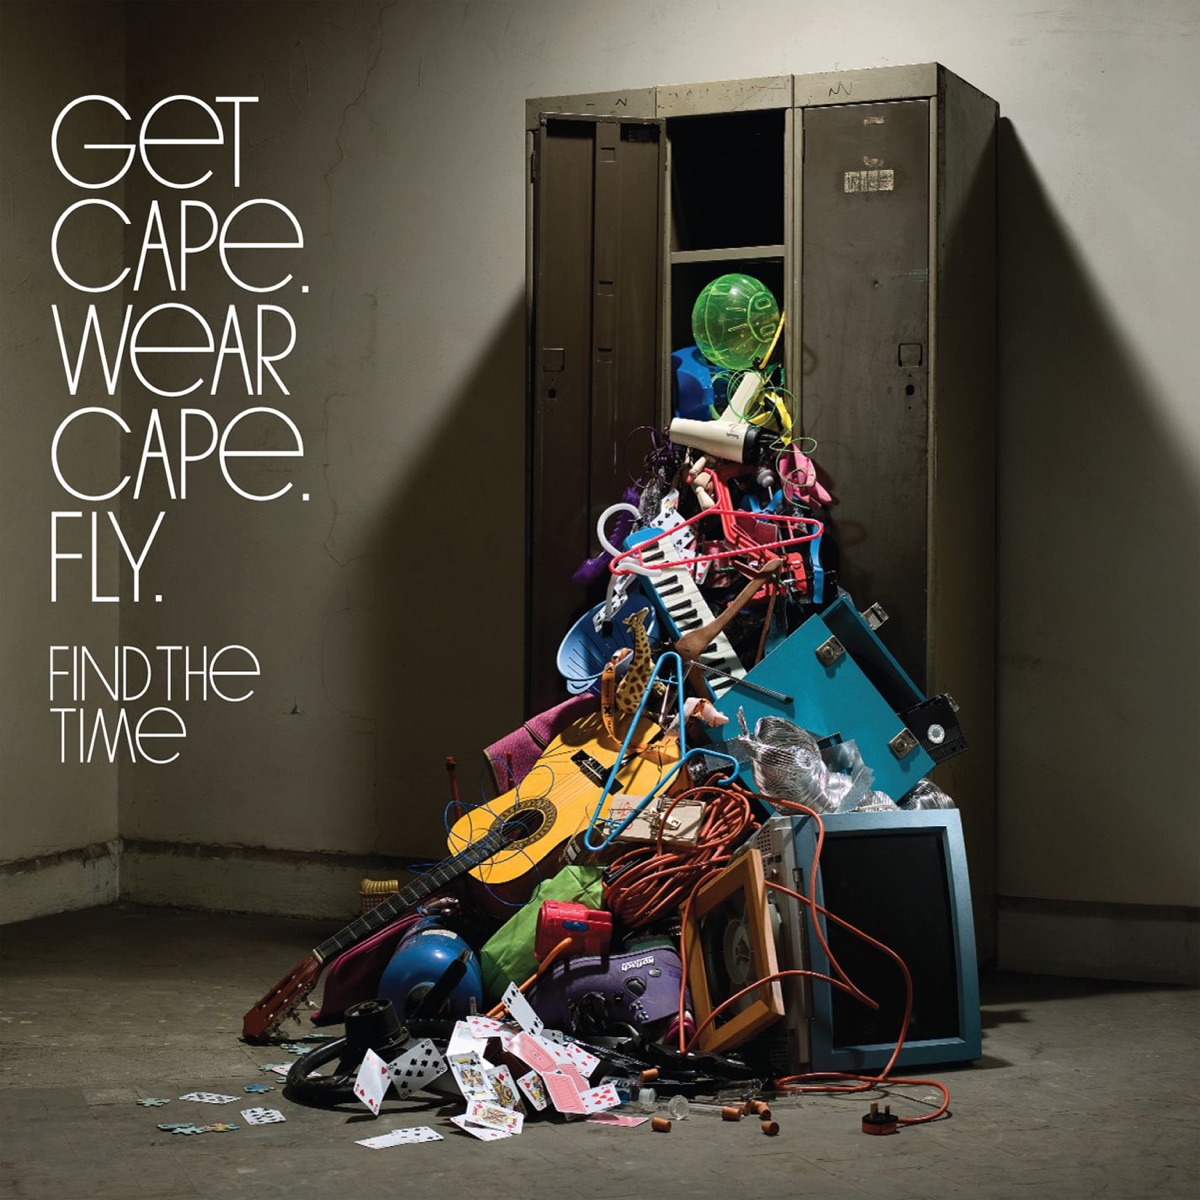 Get Cape. Wear Cape. Fly - Album by Get Cape. Wear Cape. Fly - Apple Music